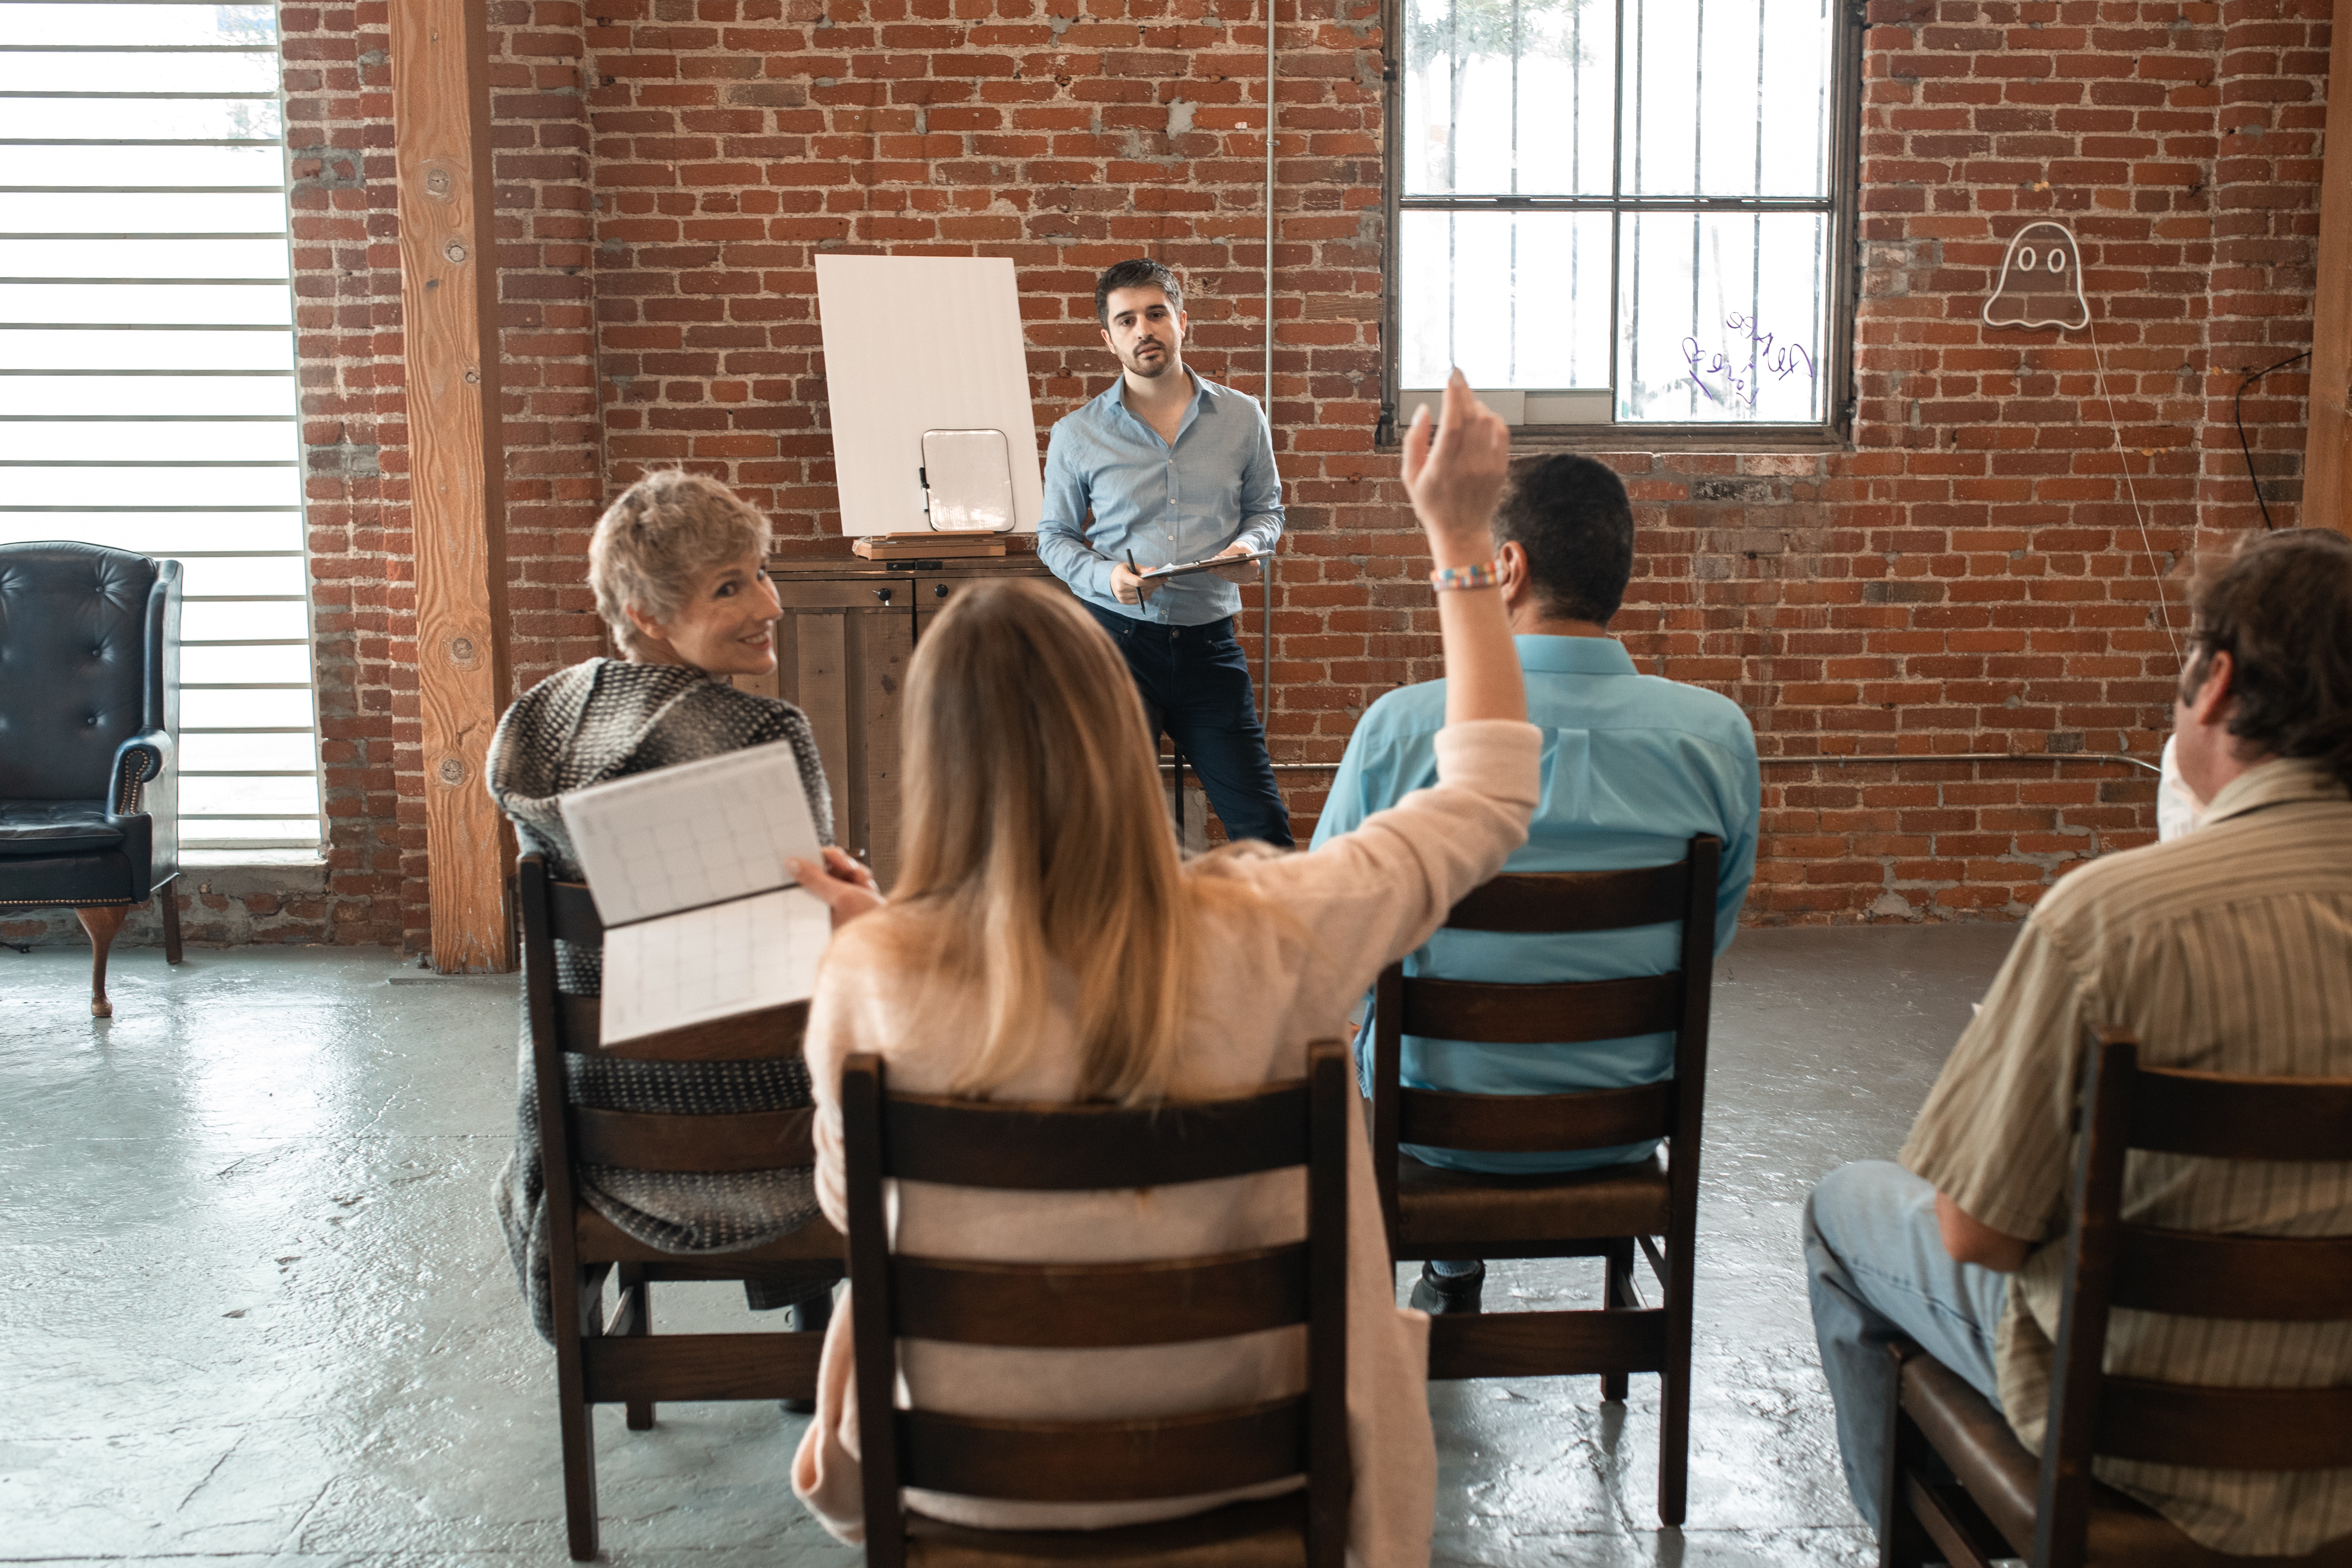 Photo shows a group of people at a meeting in chairs facing a man with a whiteboard who is presenting to them. There is a woman with her hand up waiting to as a question